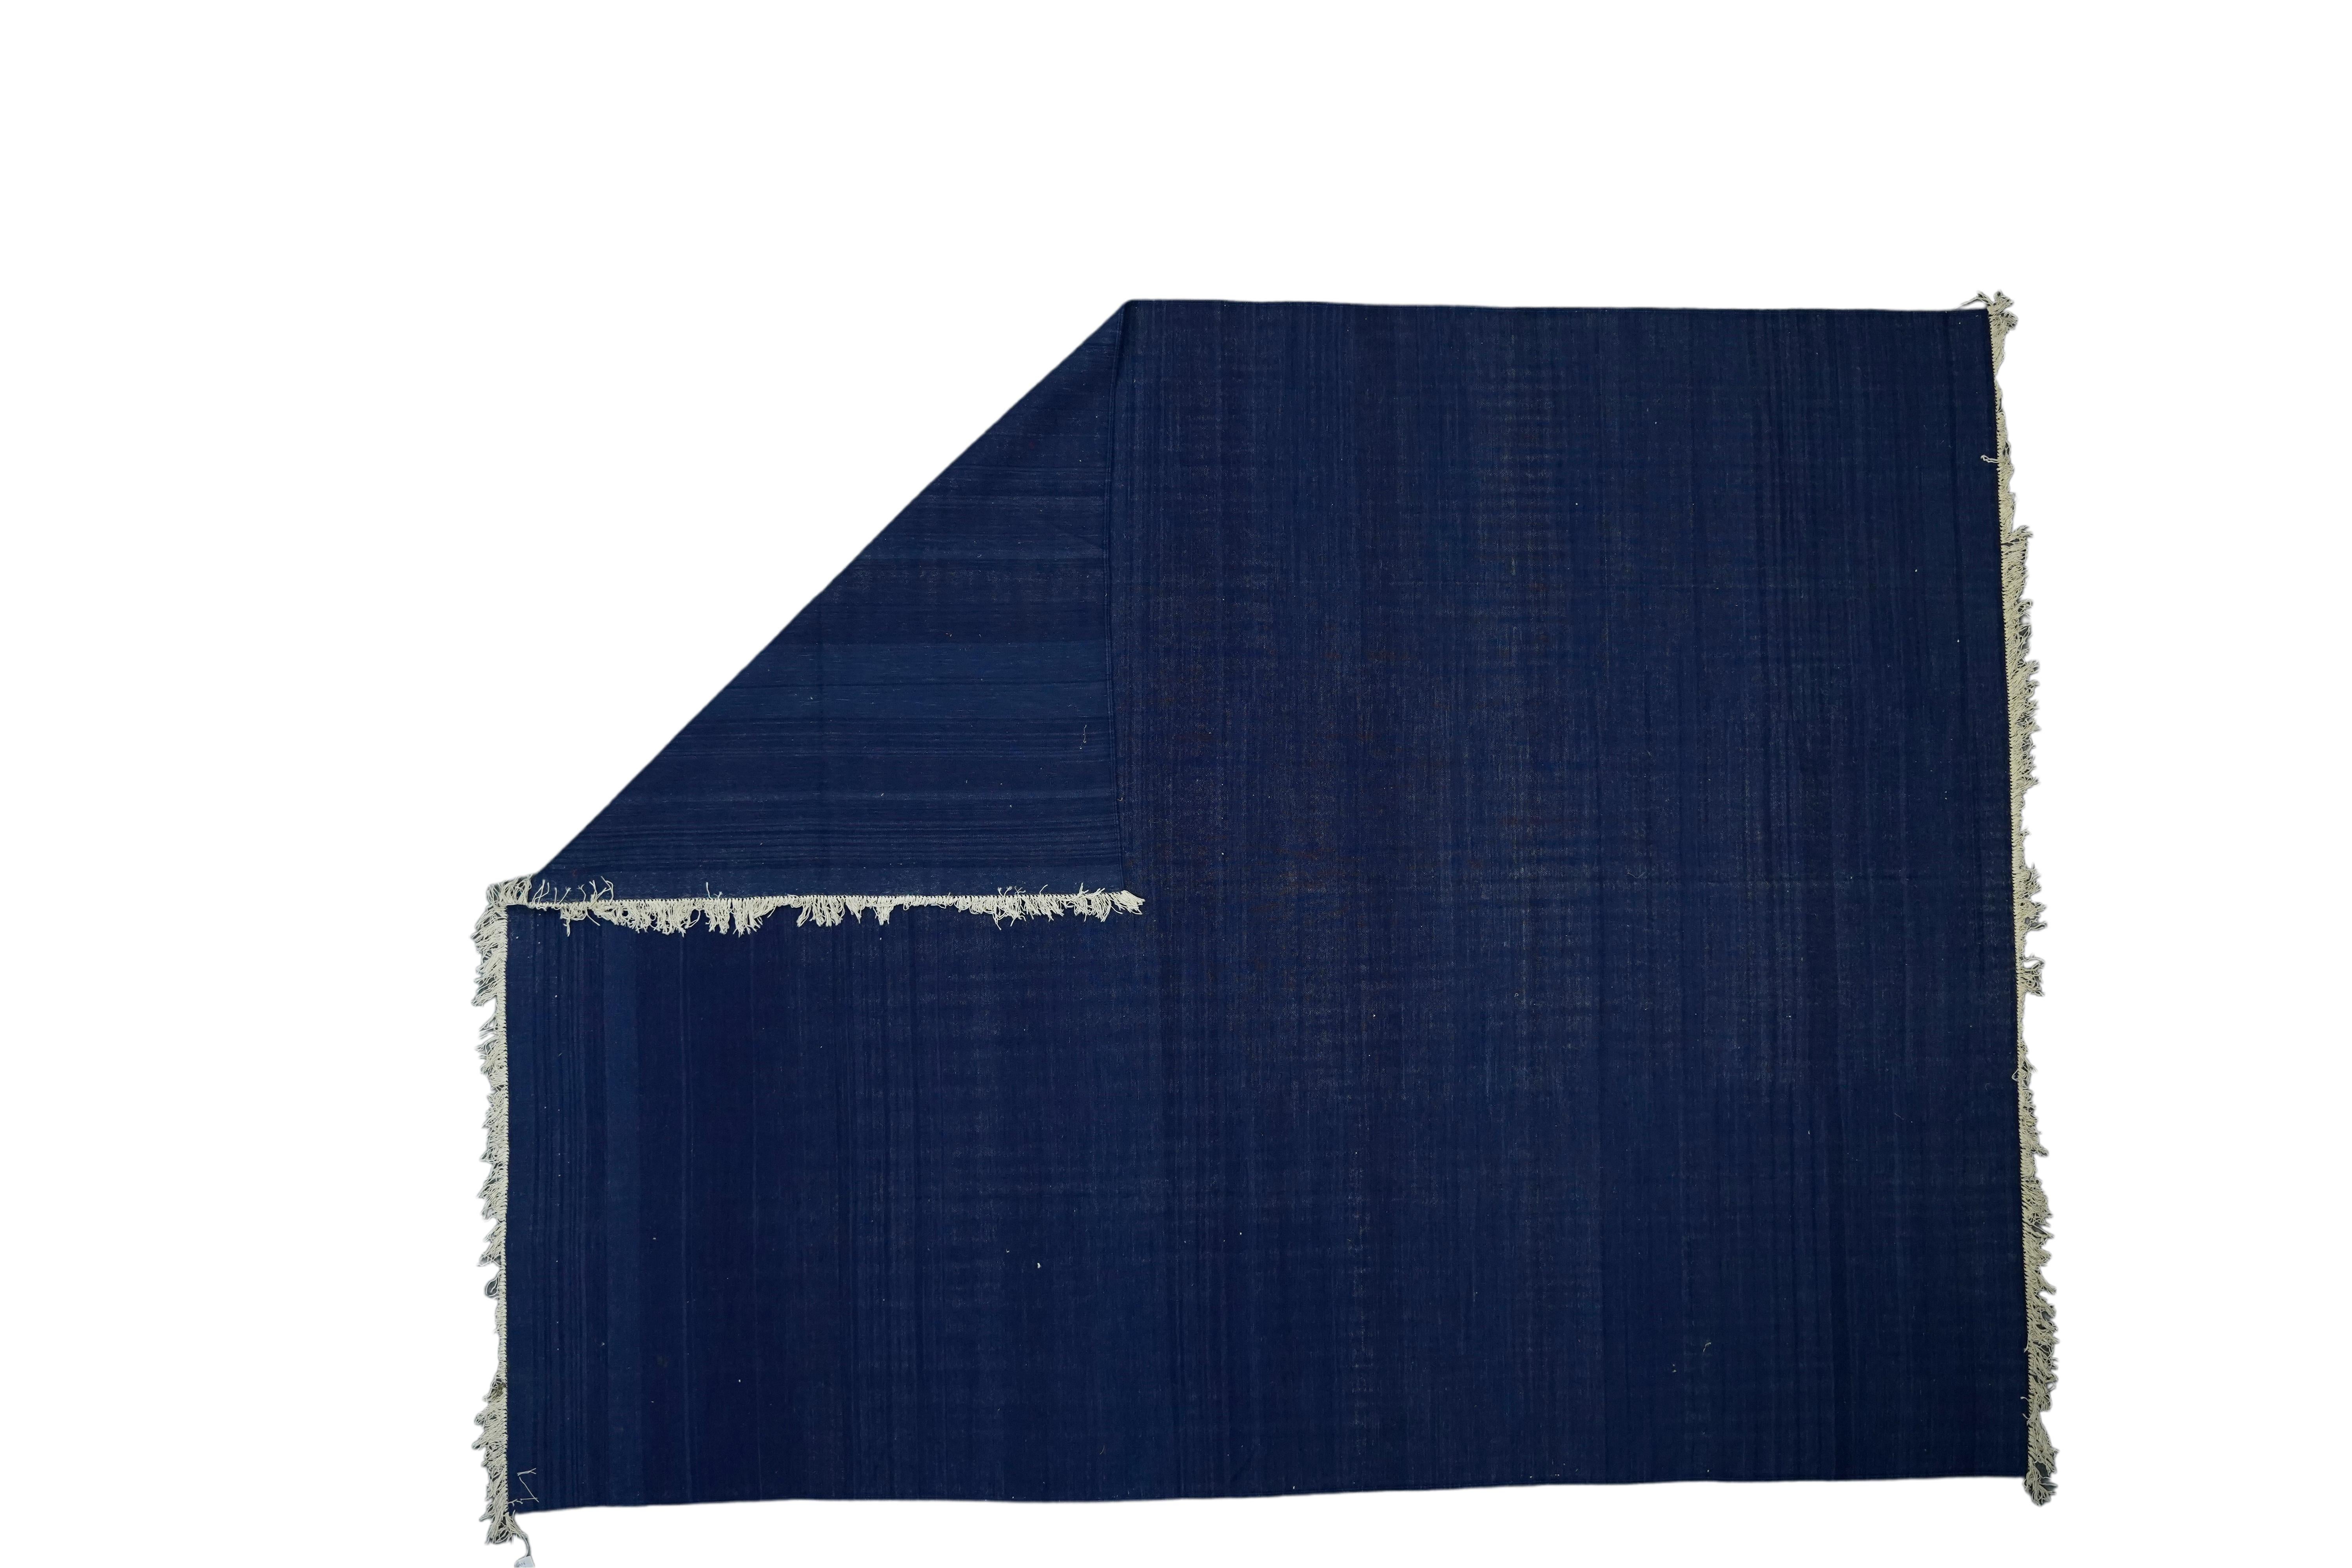 This 9x12 rug is a rare vintage Dhurrie rug from an exciting new mid-century curation by Rug & Kilim. Handwoven in a wool flatweave, it originates from India circa 1950-1960, and enjoys a deep saturated blue field with a natural abrash. 

On the